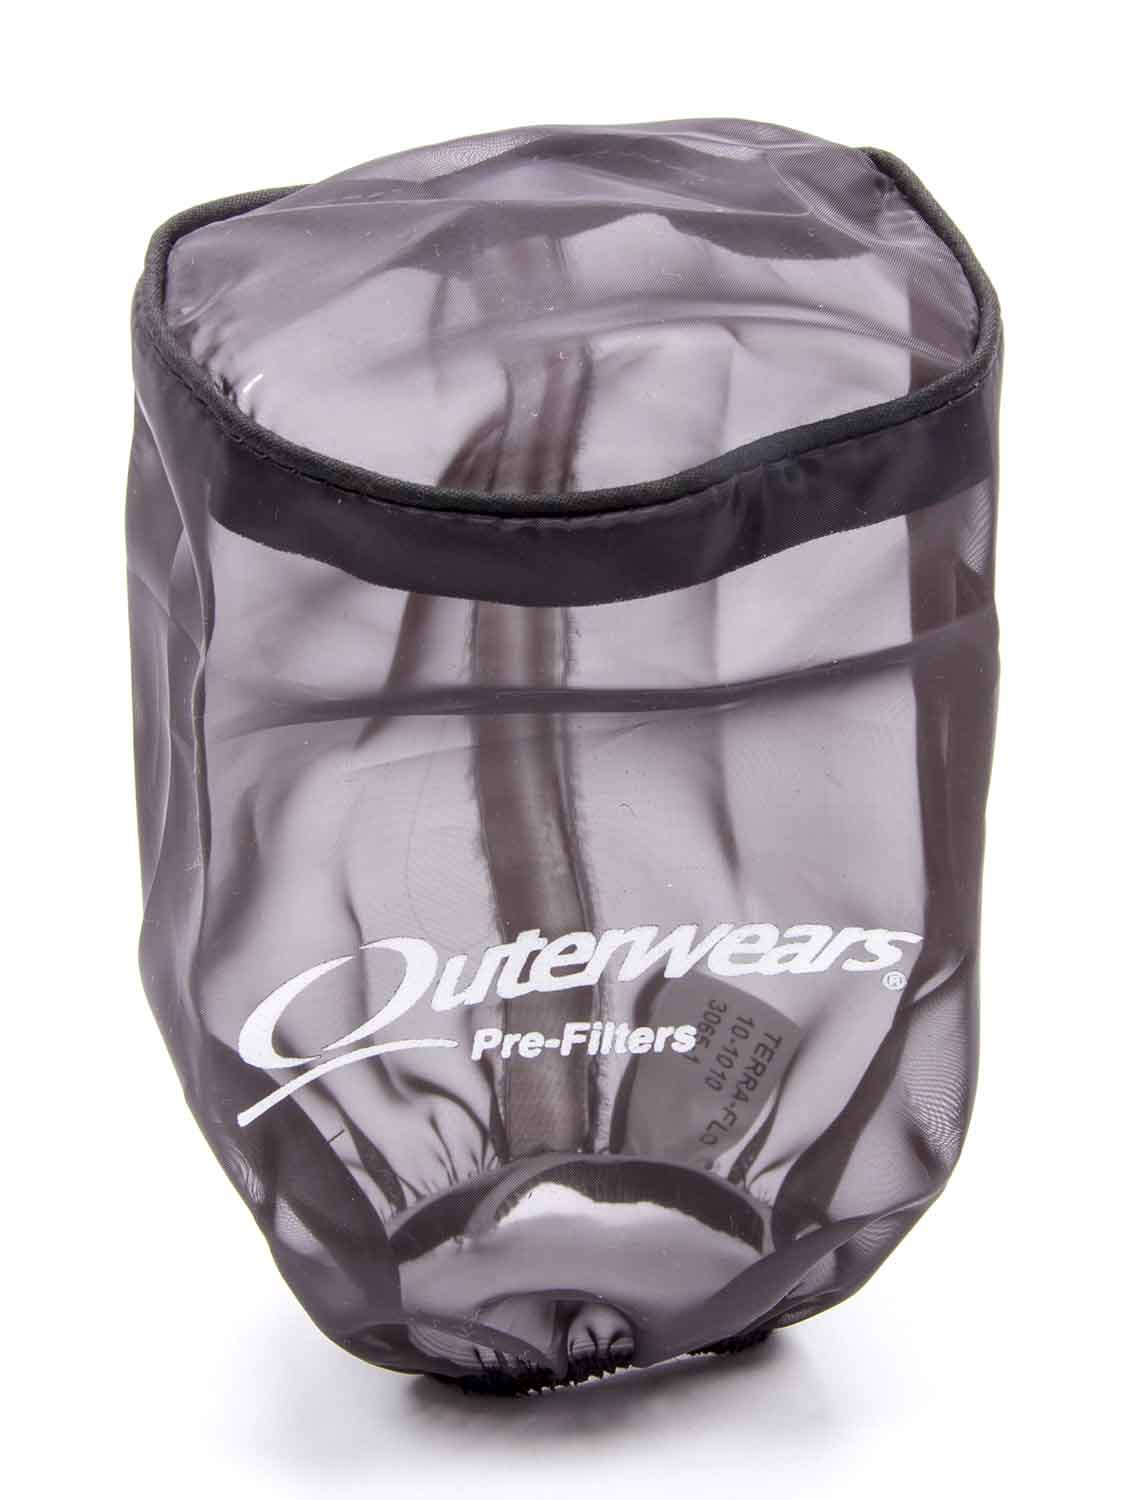 Outerwears 10-1010-01 Air Filter Wrap, Pre Filter, 3-1/2 in OD, 6 in Tall, Top, Polyester, Black, Each